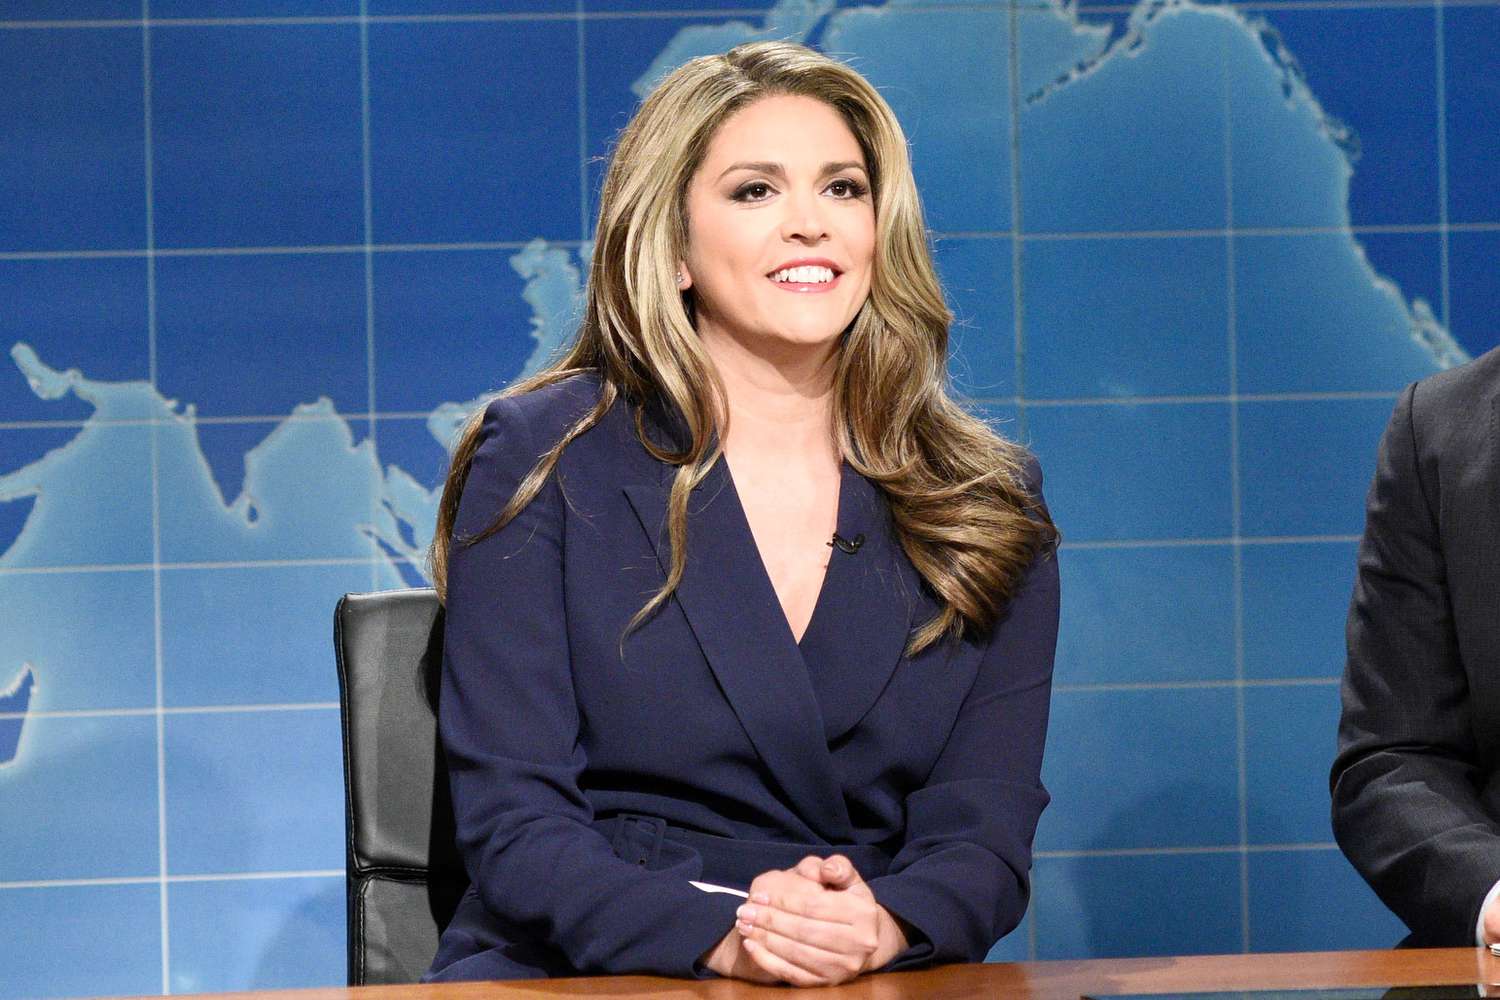 No, Cecily Strong did not quietly leave Saturday Night Live